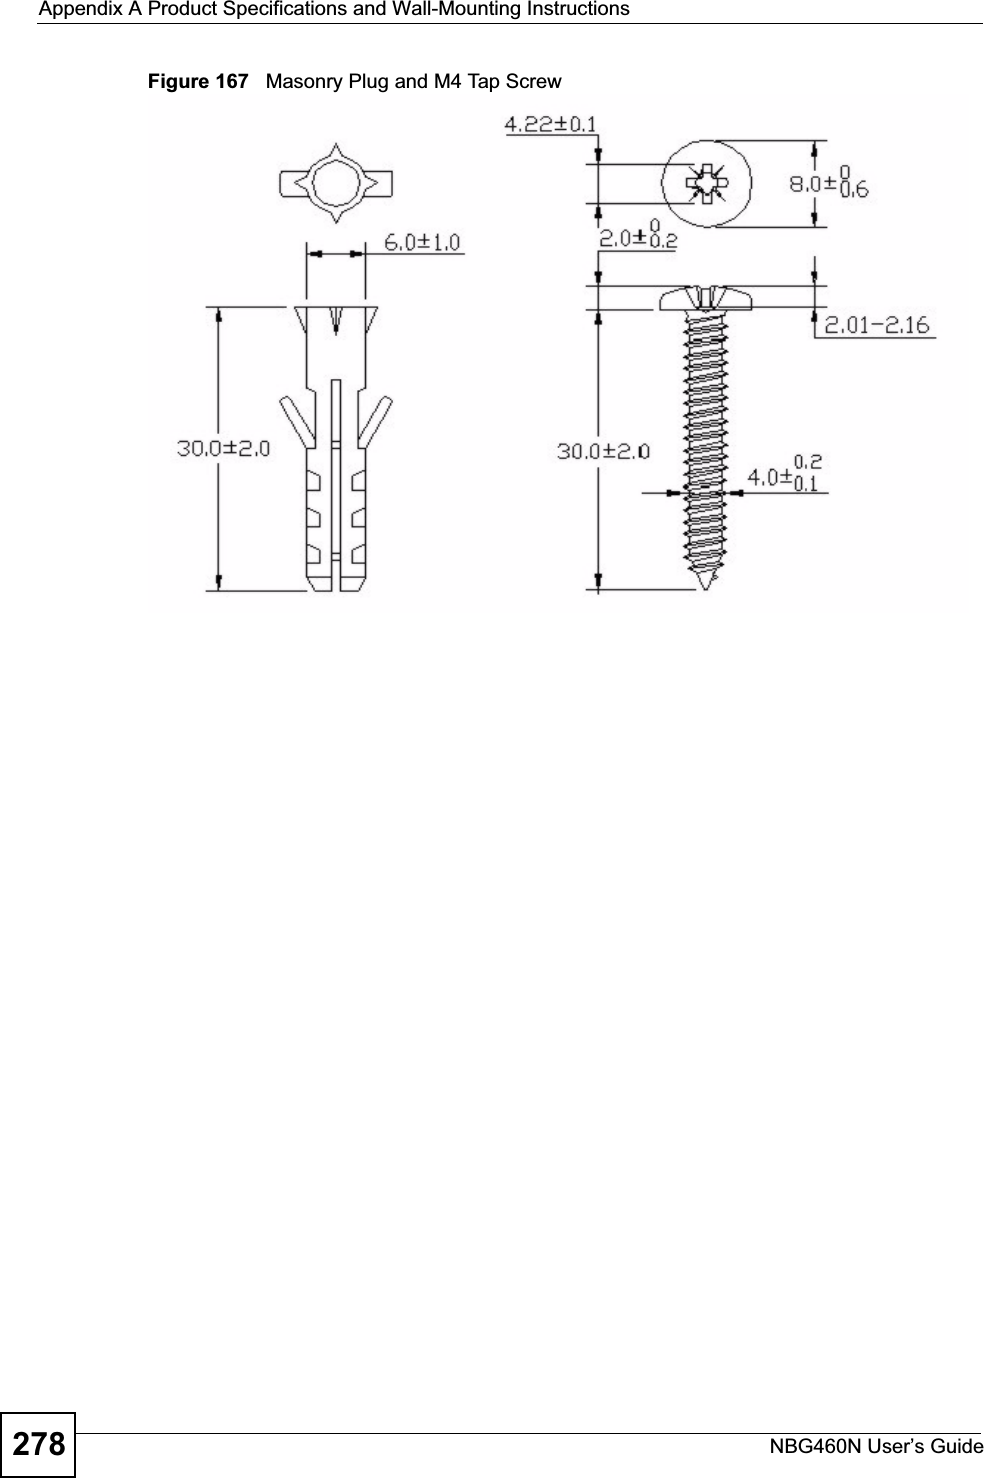 Appendix A Product Specifications and Wall-Mounting InstructionsNBG460N User’s Guide278Figure 167   Masonry Plug and M4 Tap Screw